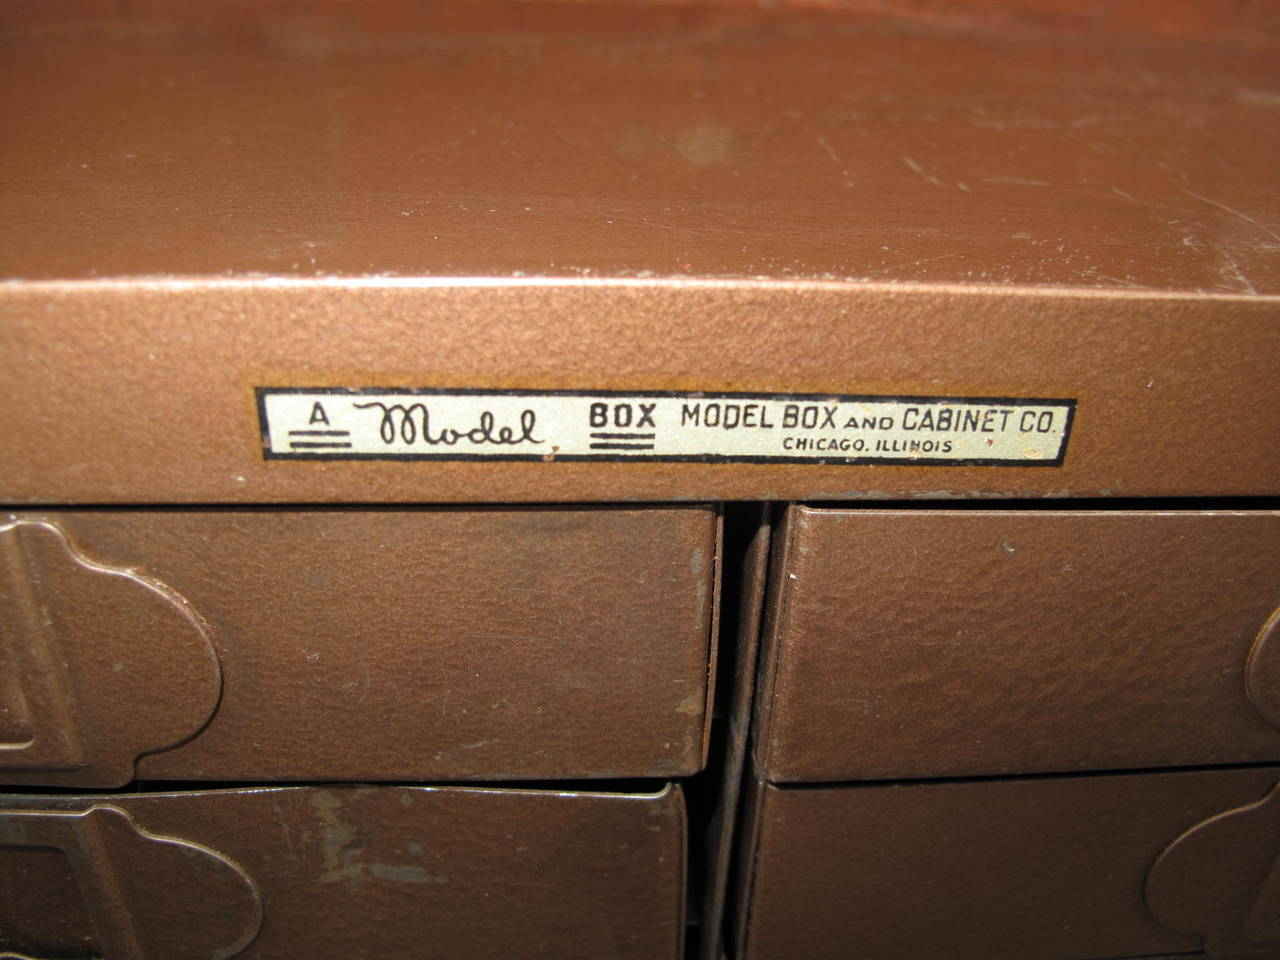 Mid-20th Century Bronze Hue Metal Toolbox by Model Box & Cabinet Co.